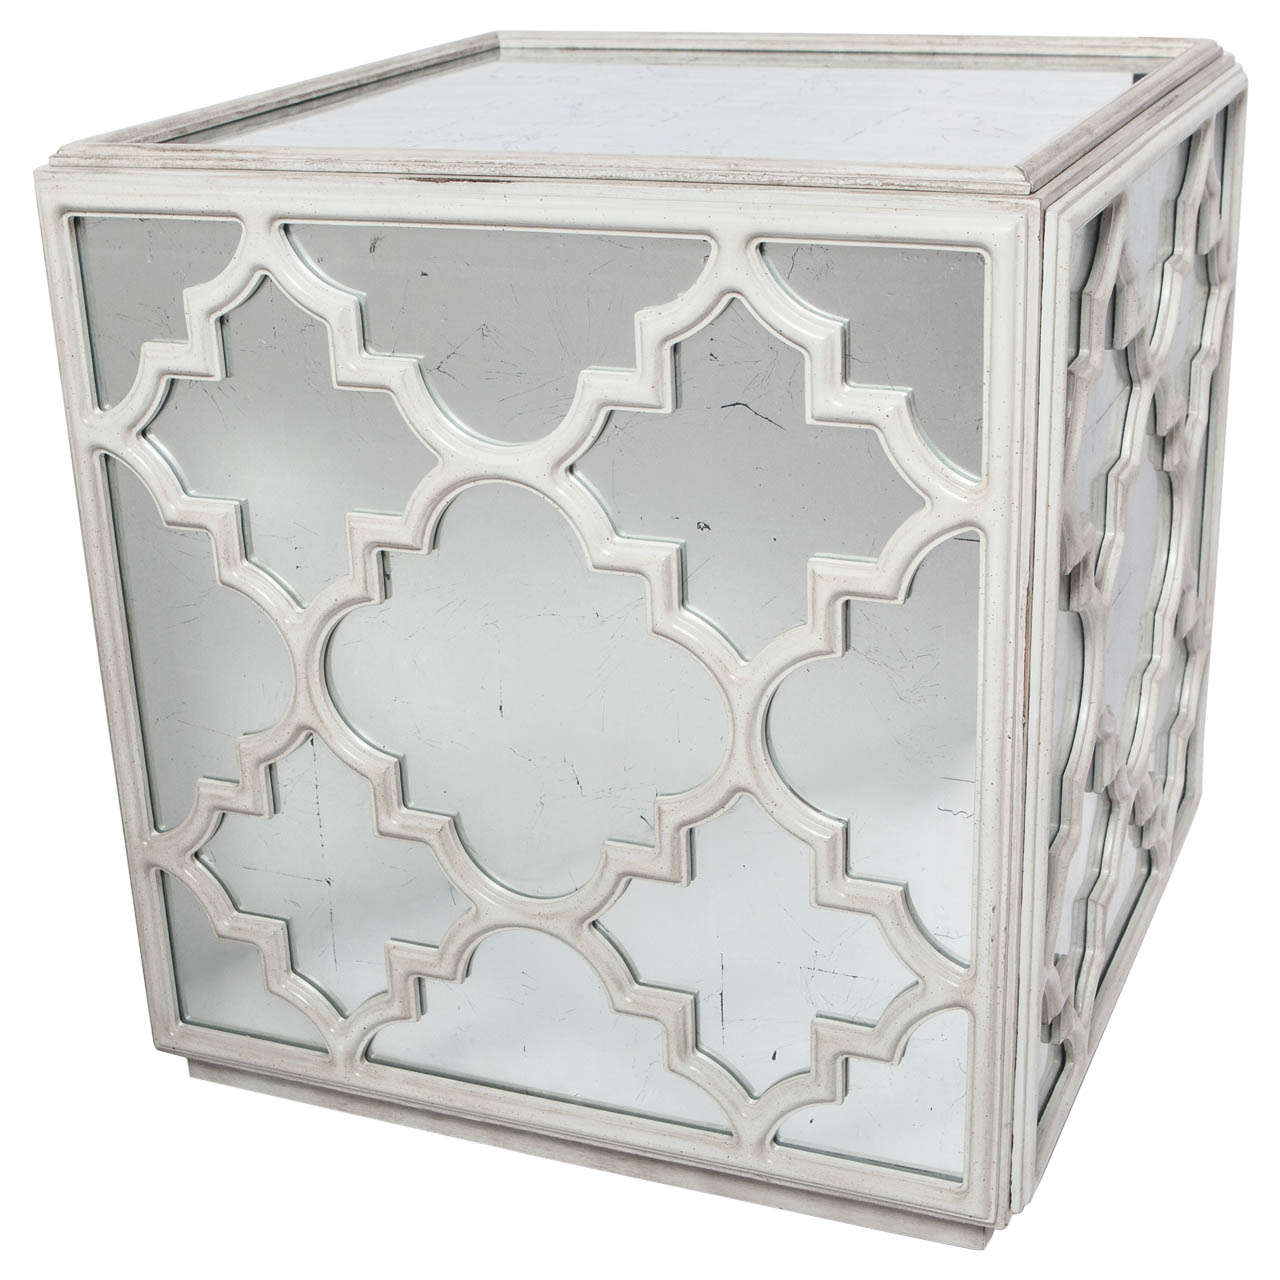 Mirrored Cube, Coffee or End Table